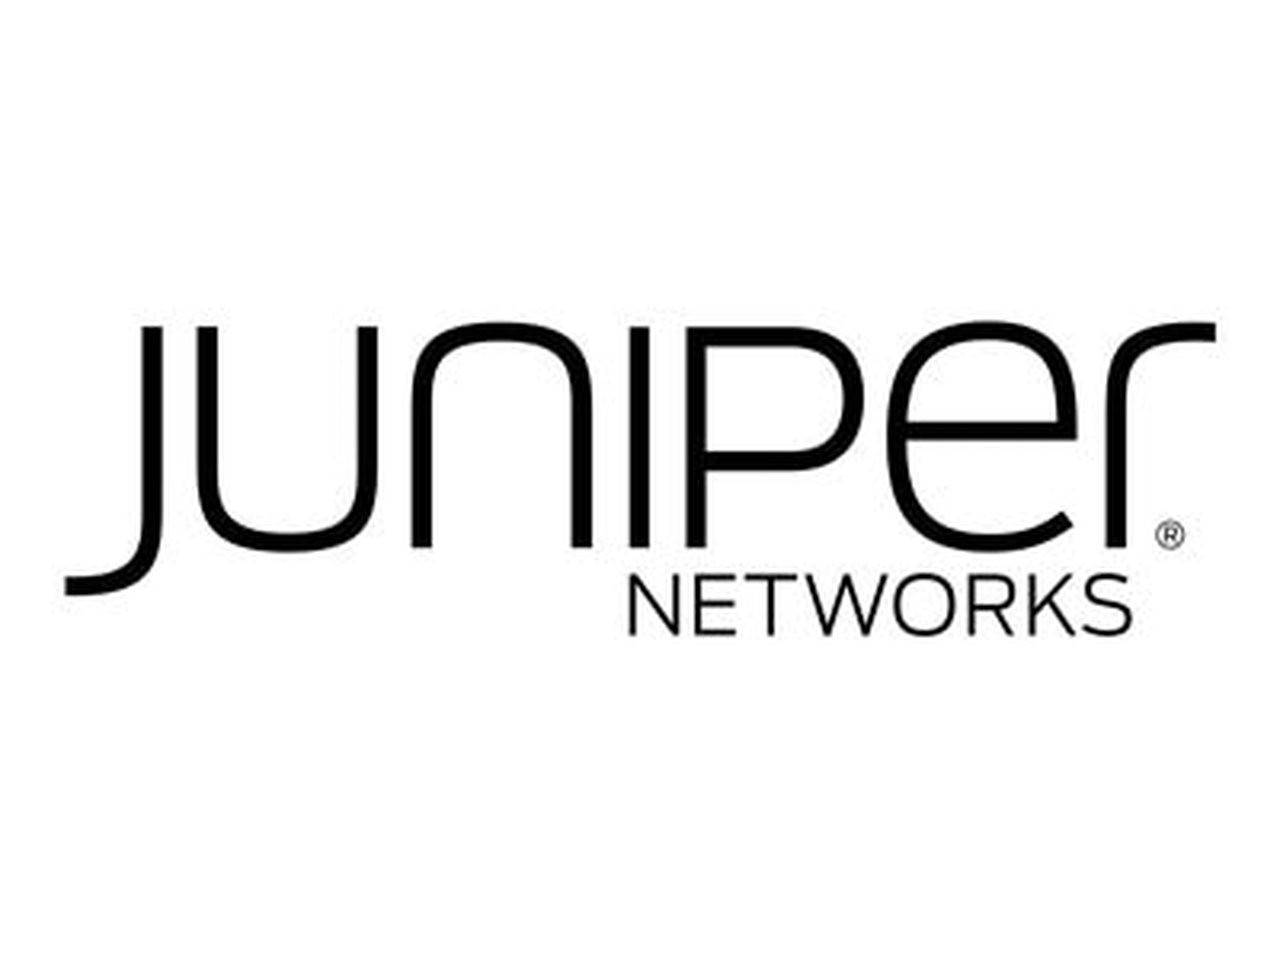 Juniper Junos Policy Control. Additional 100, 000 Subscribers License. This Product Provides Dynamic Policy Enforcement And Online Charging Utilizing Gx And Gy Interfaces.